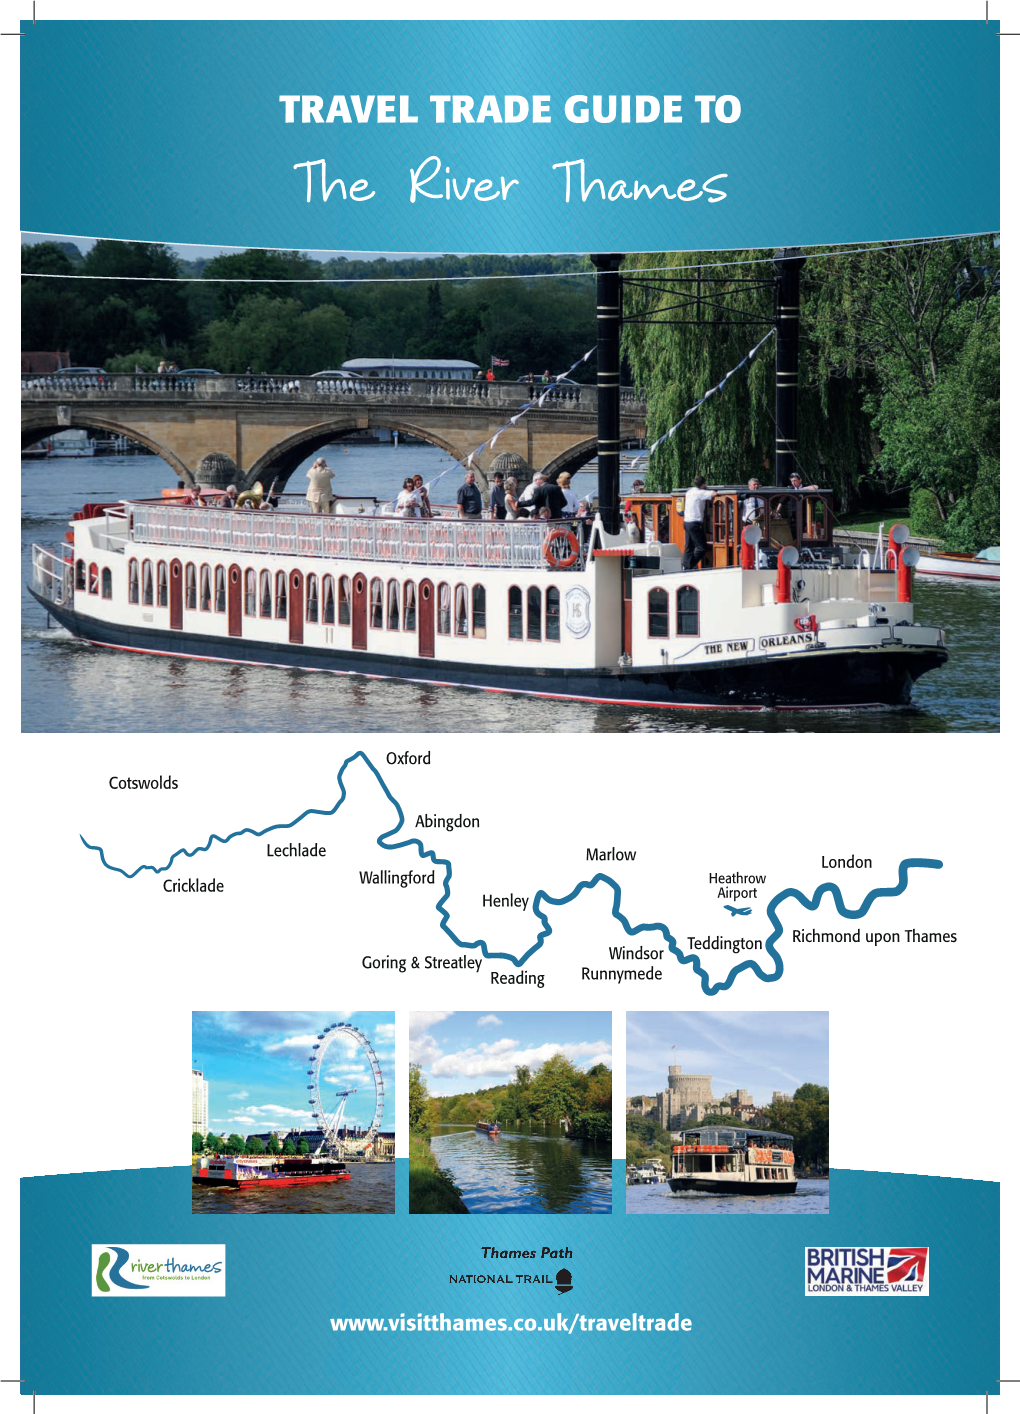 TRAVEL TRADE GUIDE to the River Thames